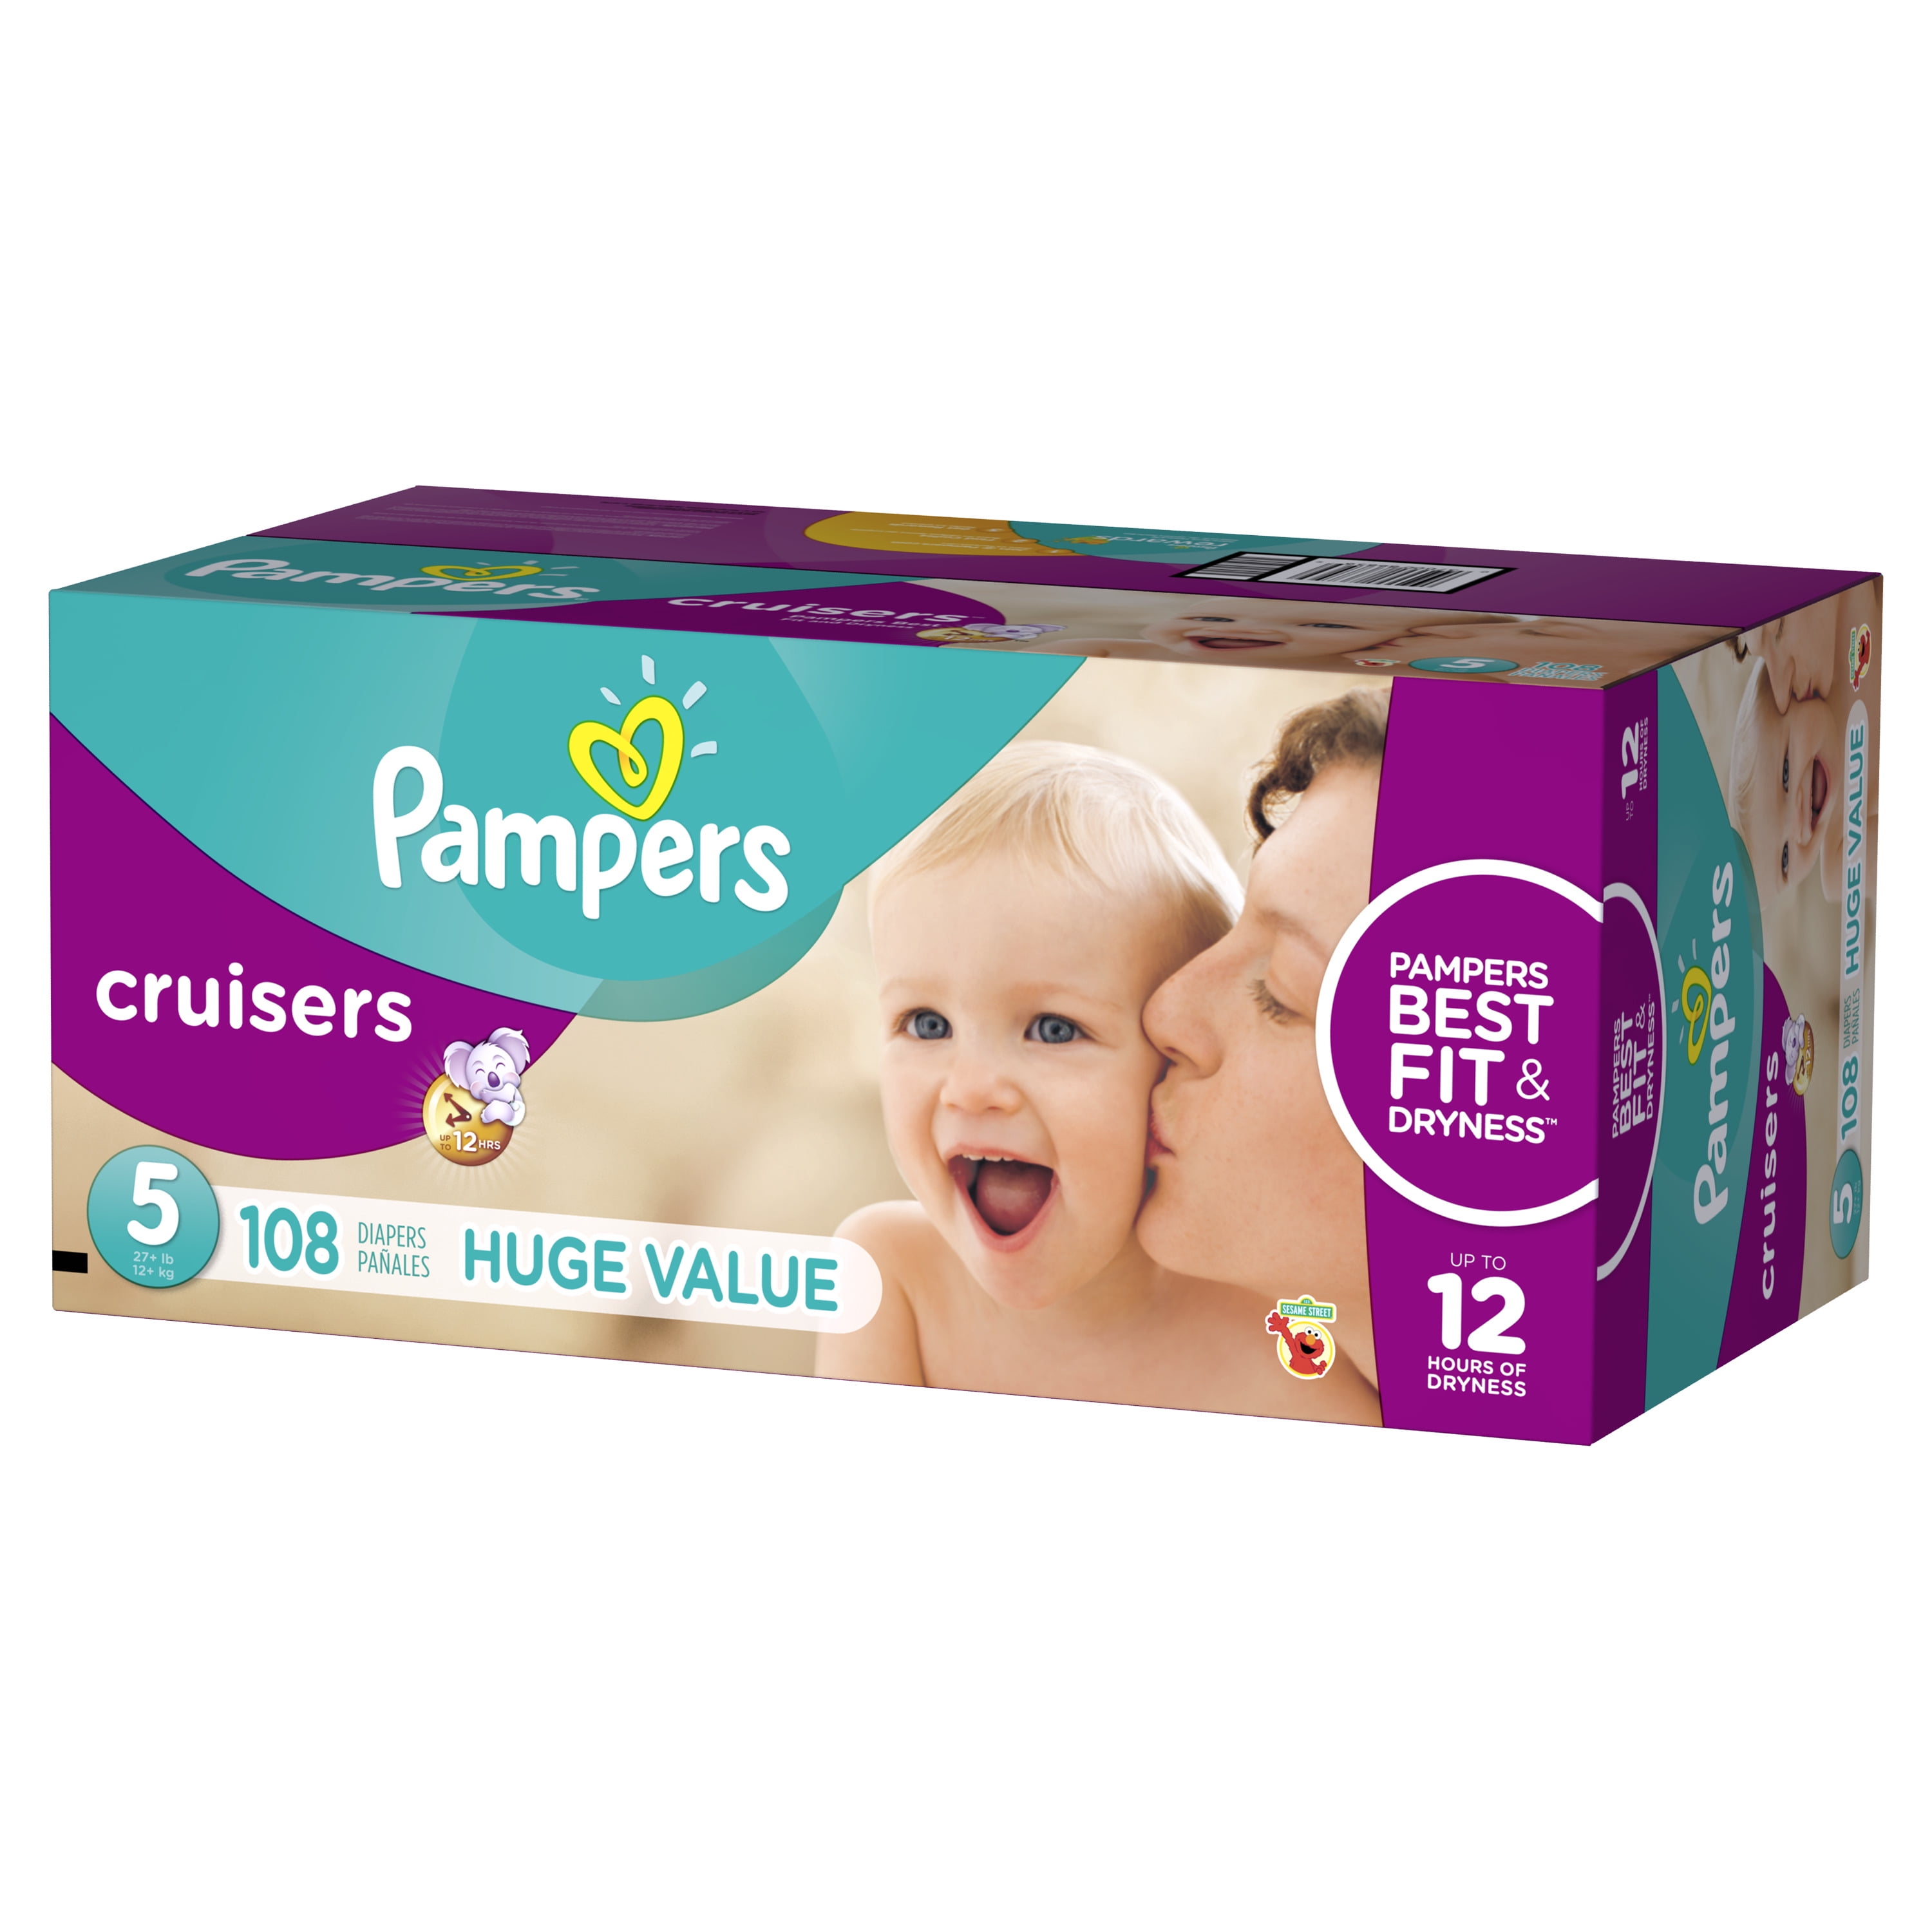 Pampers Cruisers Diapers Size 5 108 